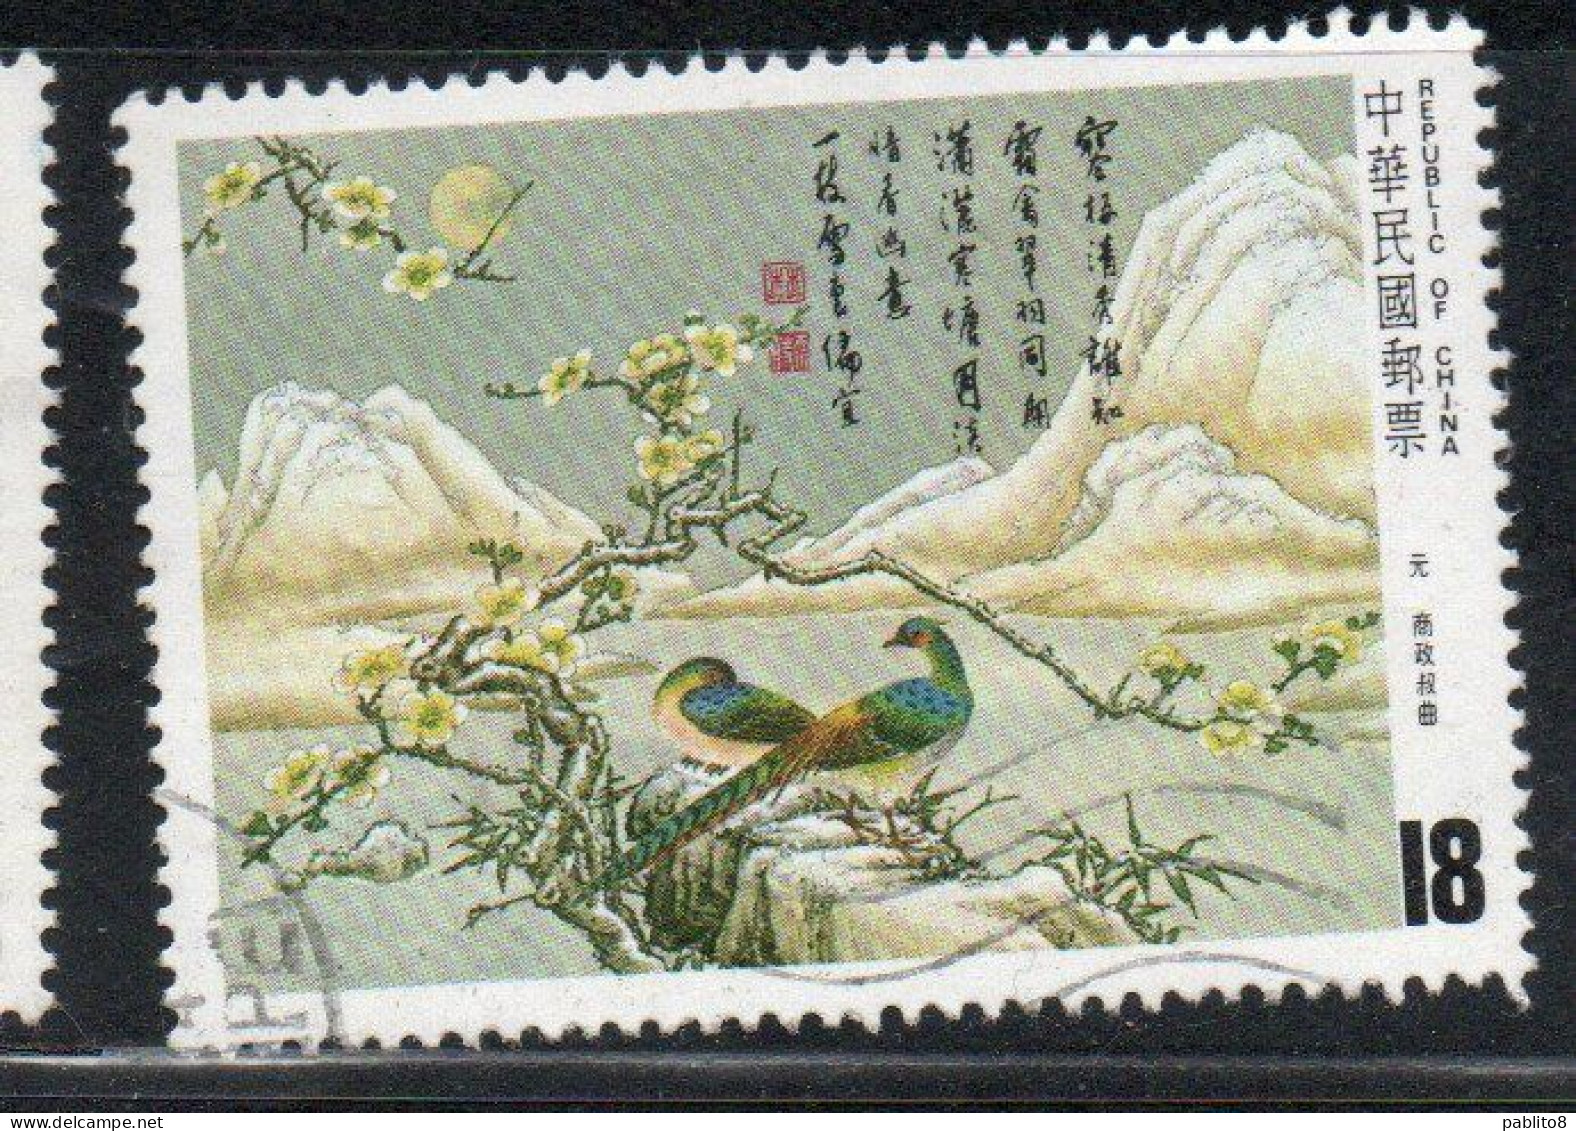 CHINA REPUBLIC CINA TAIWAN FORMOSA 1984 YUAN DINASTY POETRY ILLUSTRATION SHANG CHENG-SHU 18$ USED USATO OBLITERE' - Used Stamps